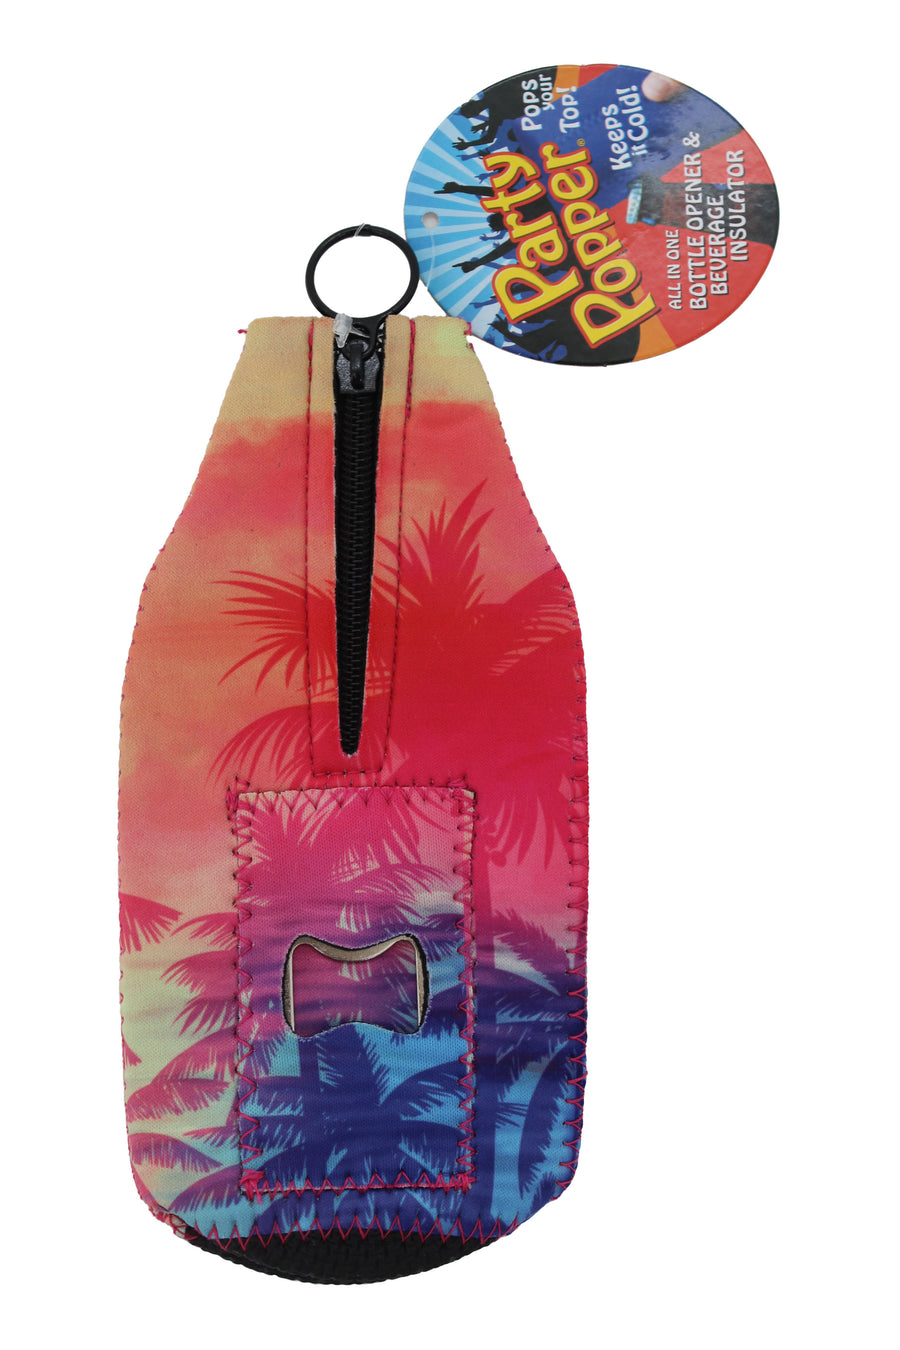 OBX SUNSET PALM TREES  PARTY POPPER KOOZIE